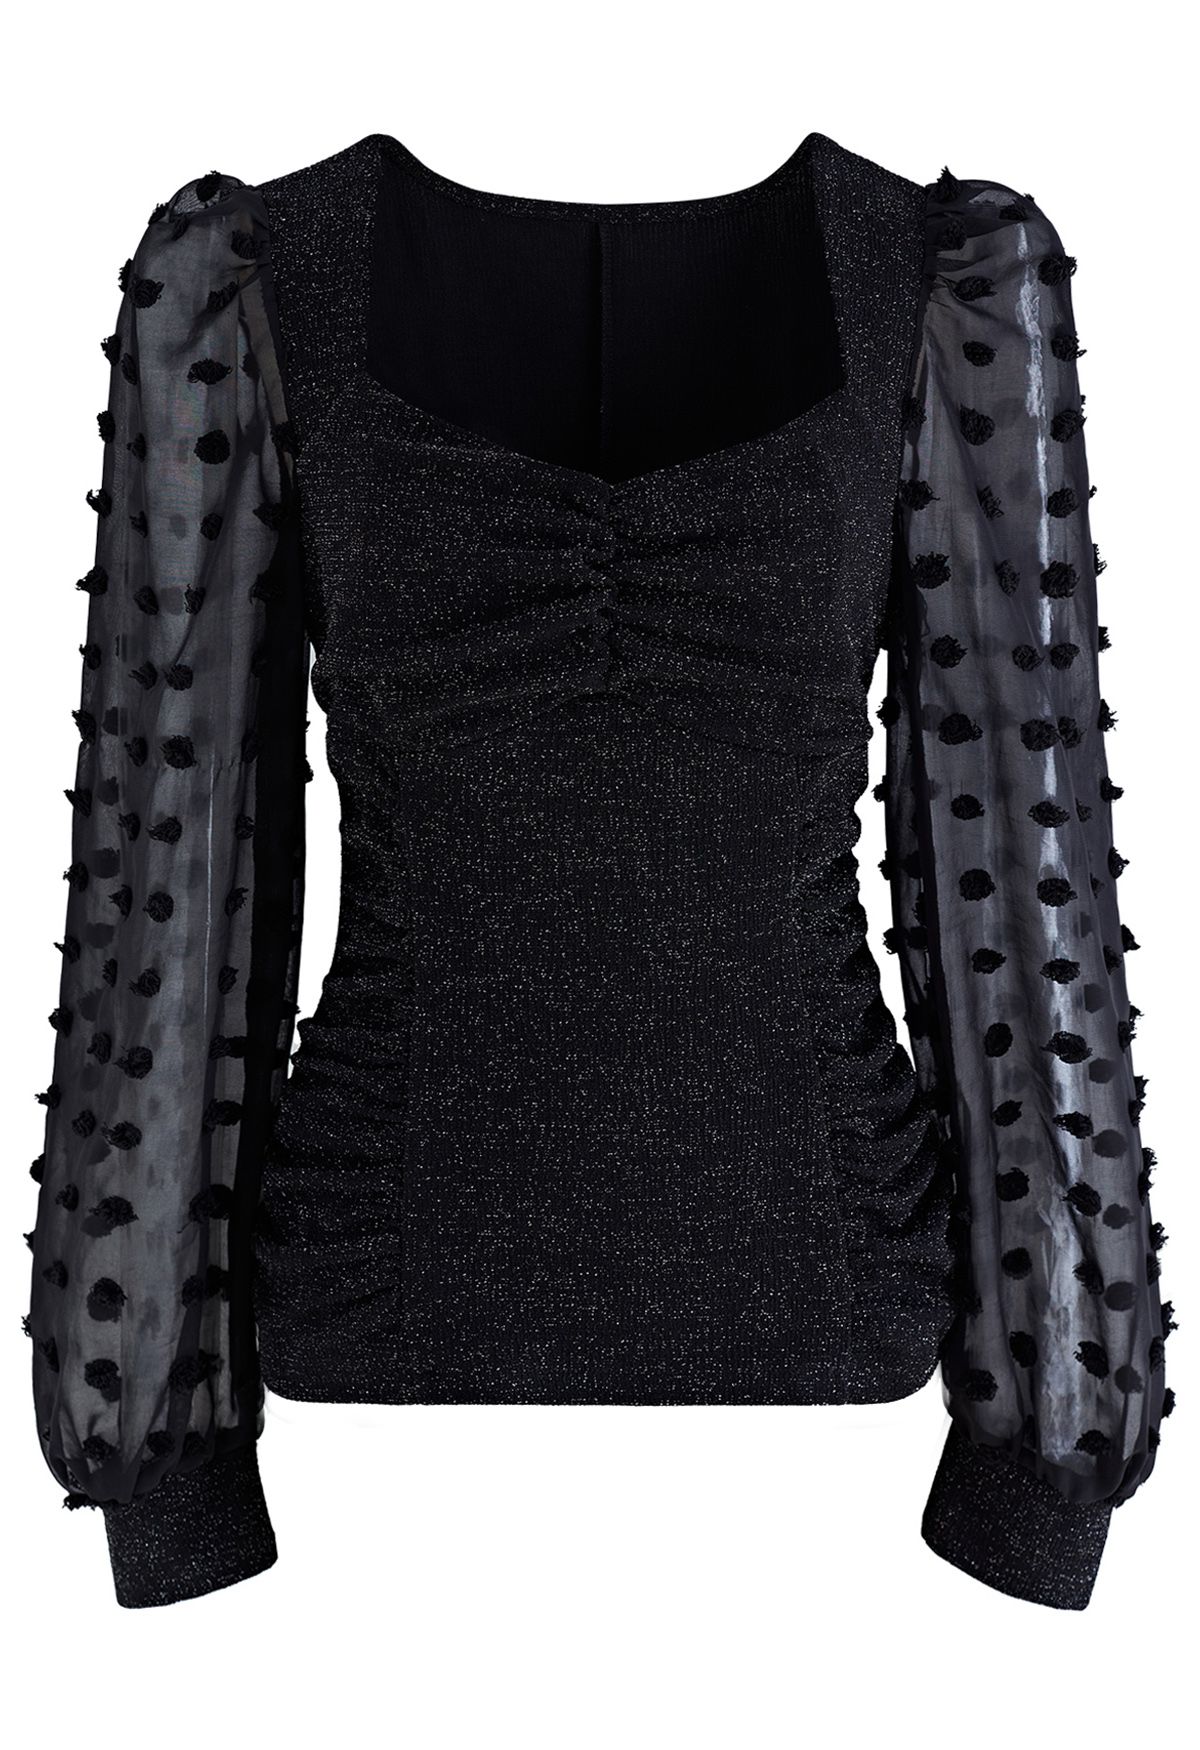 Sweetheart Neck Ruched Spliced Shimmer Top in Black